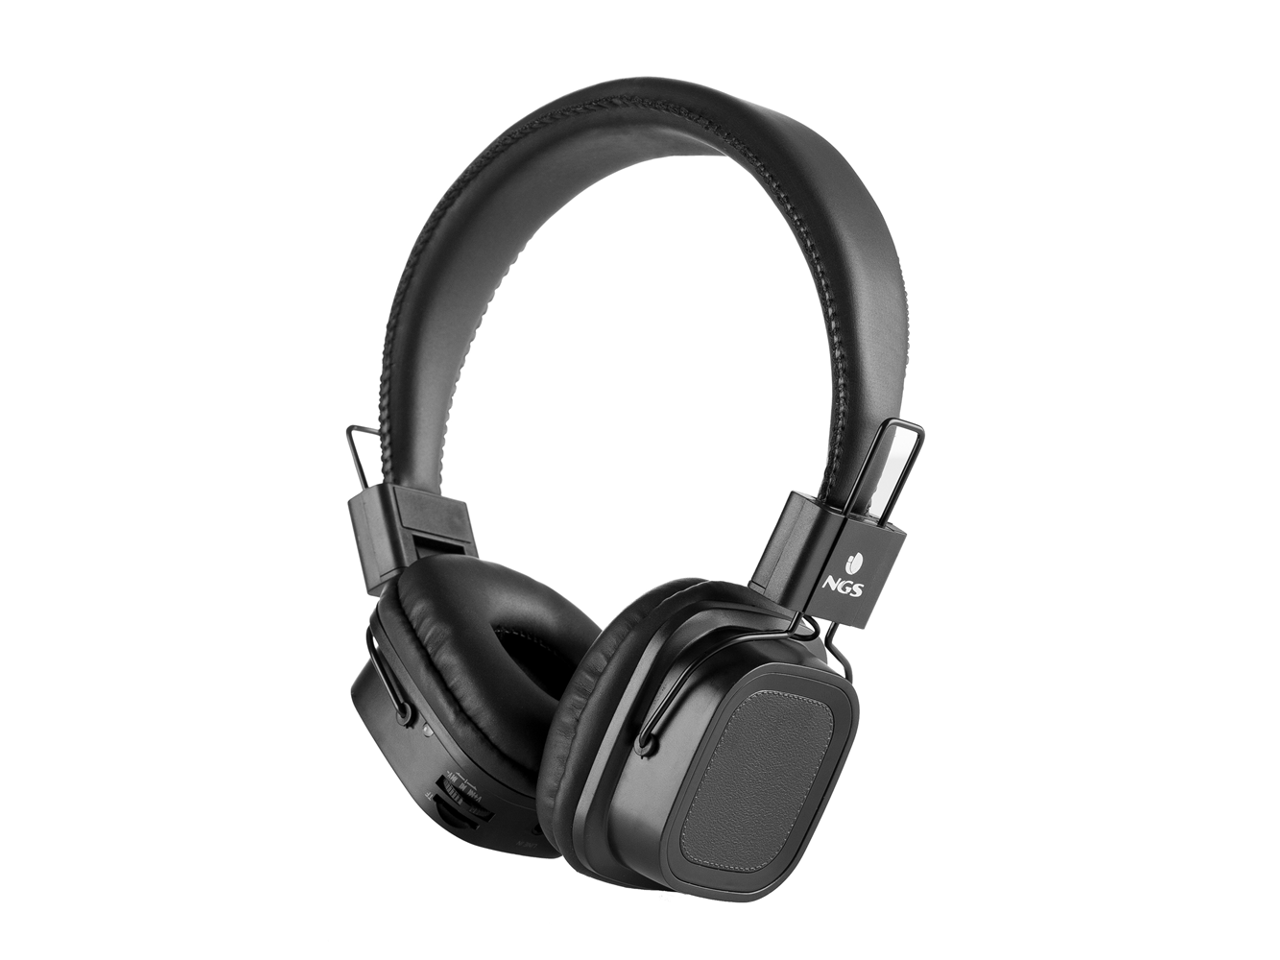 NGS Artica Jelly Bluetooth Black Stereo Headphones with Micro SD Card Slot Model ARTICAJELLYBLACK